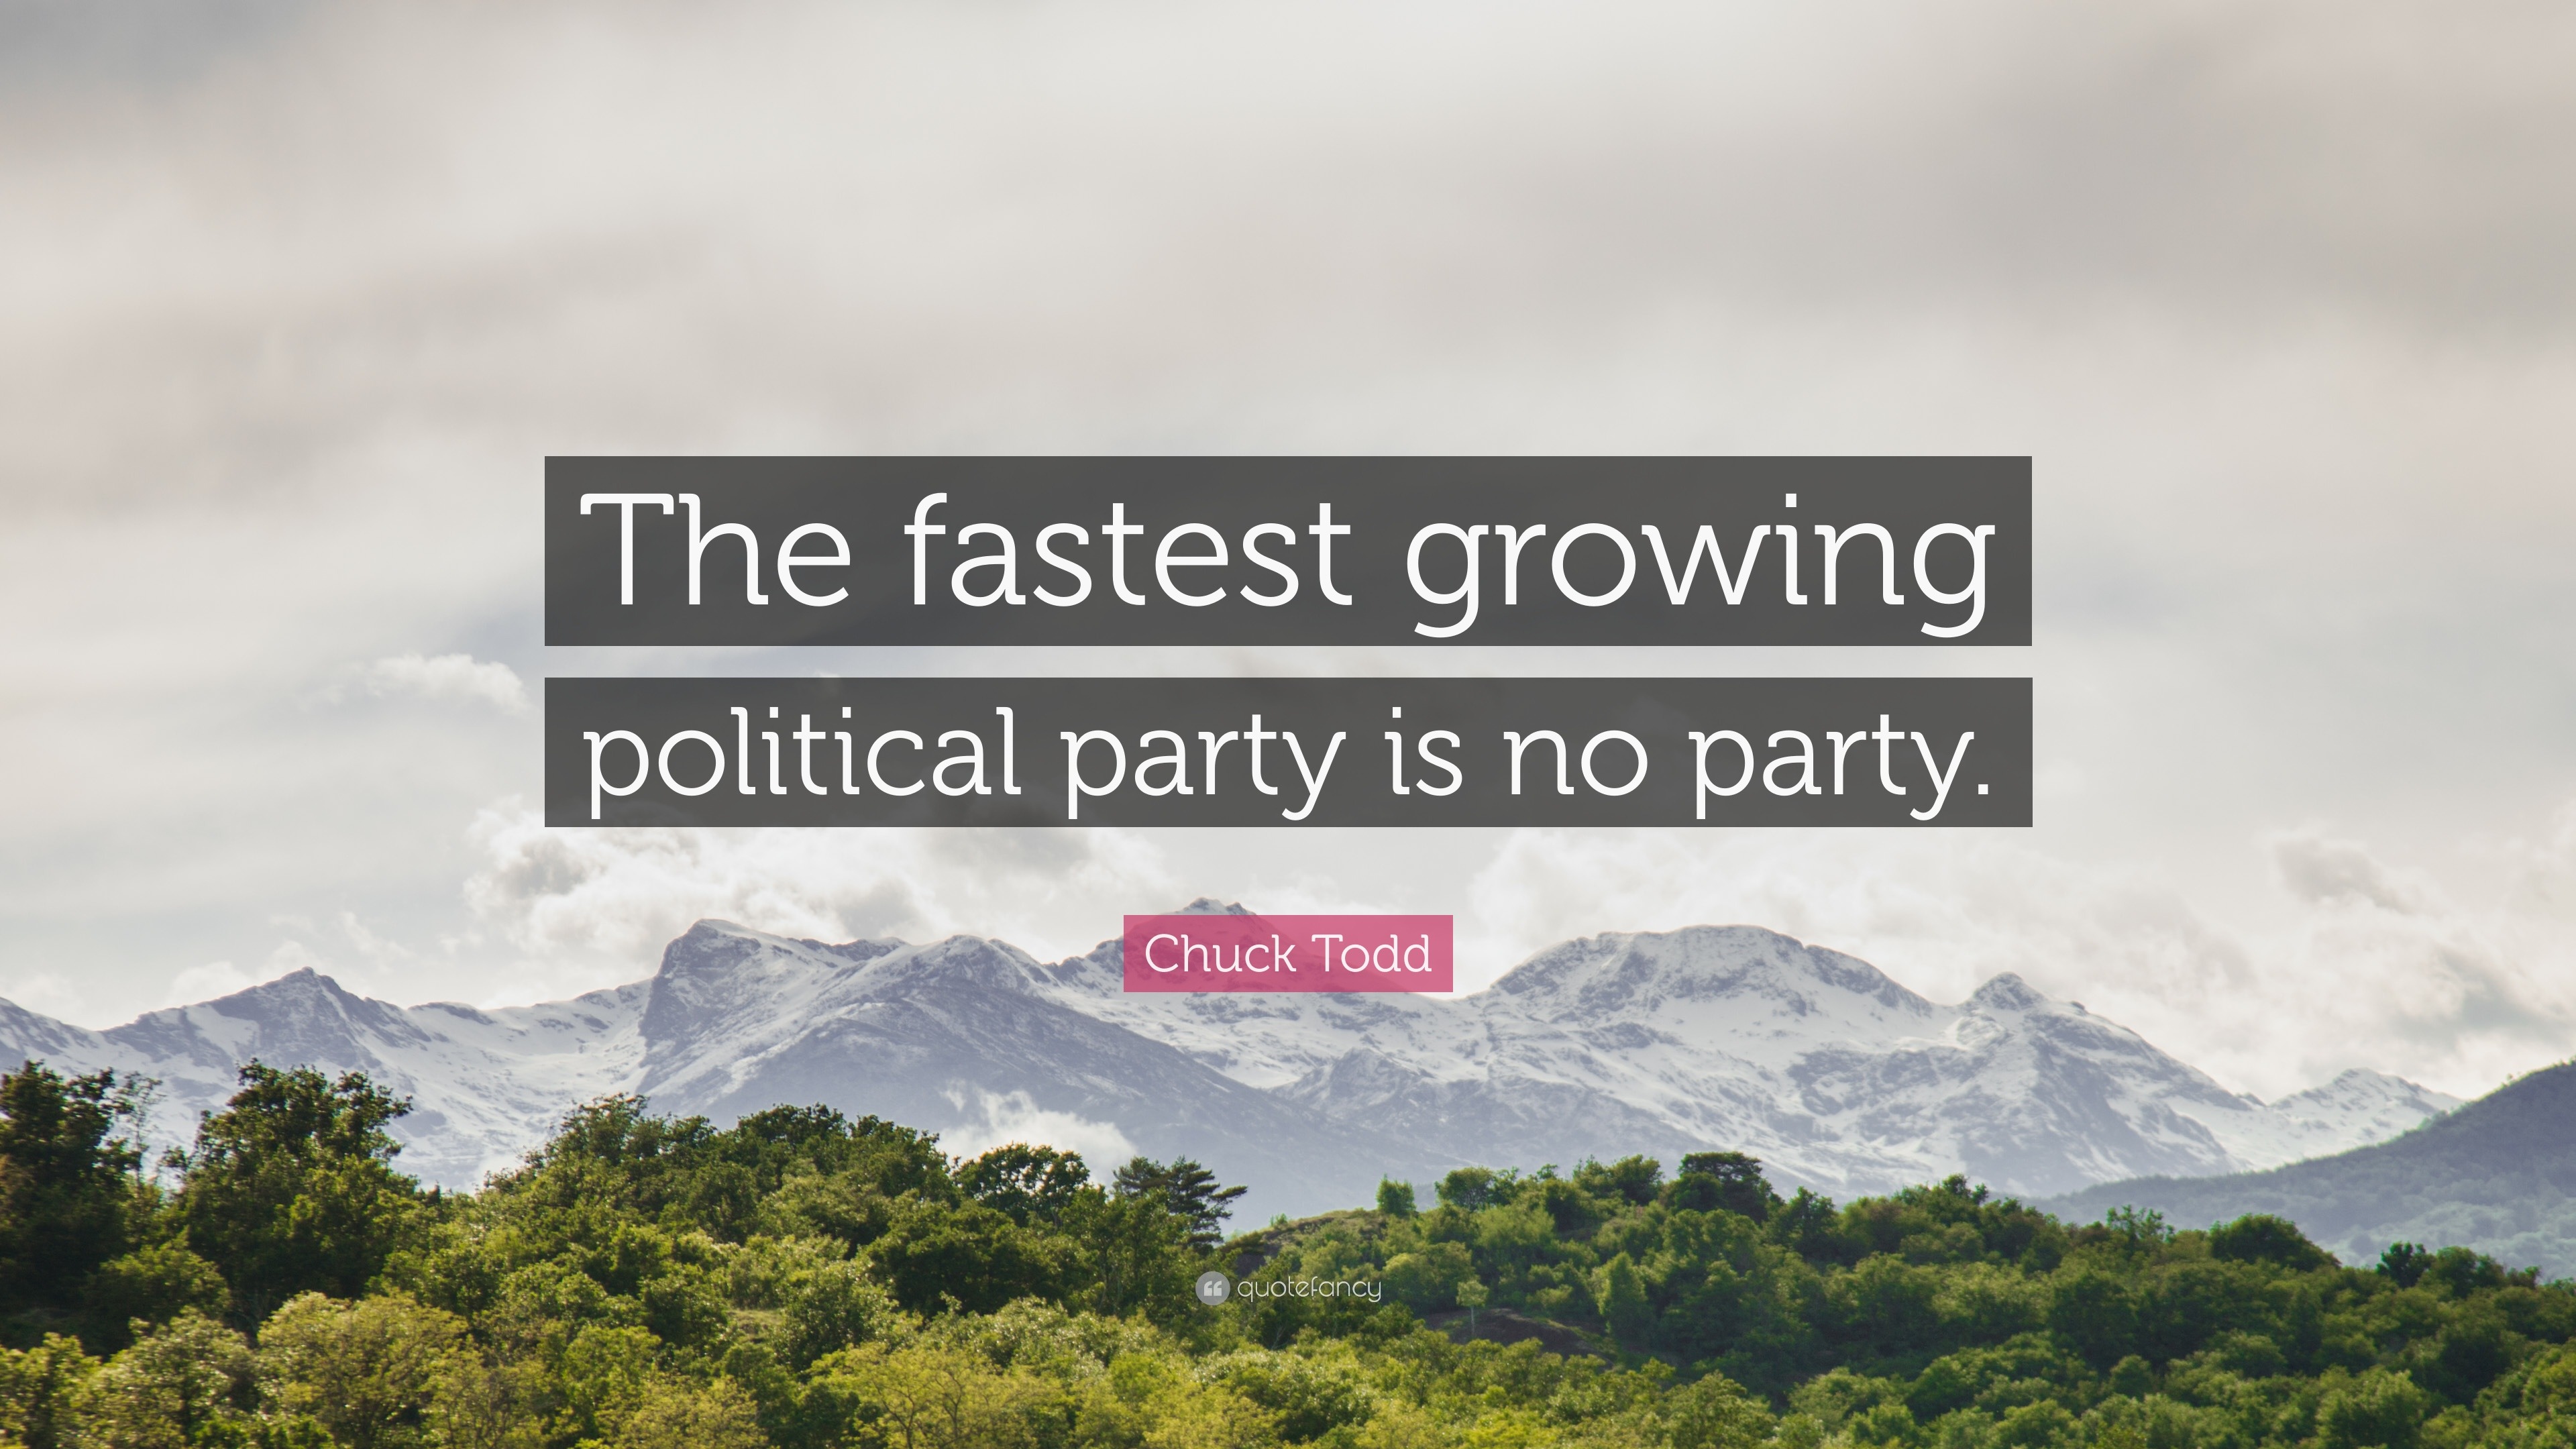 Chuck Todd Quote “The fastest growing political party is no party.”